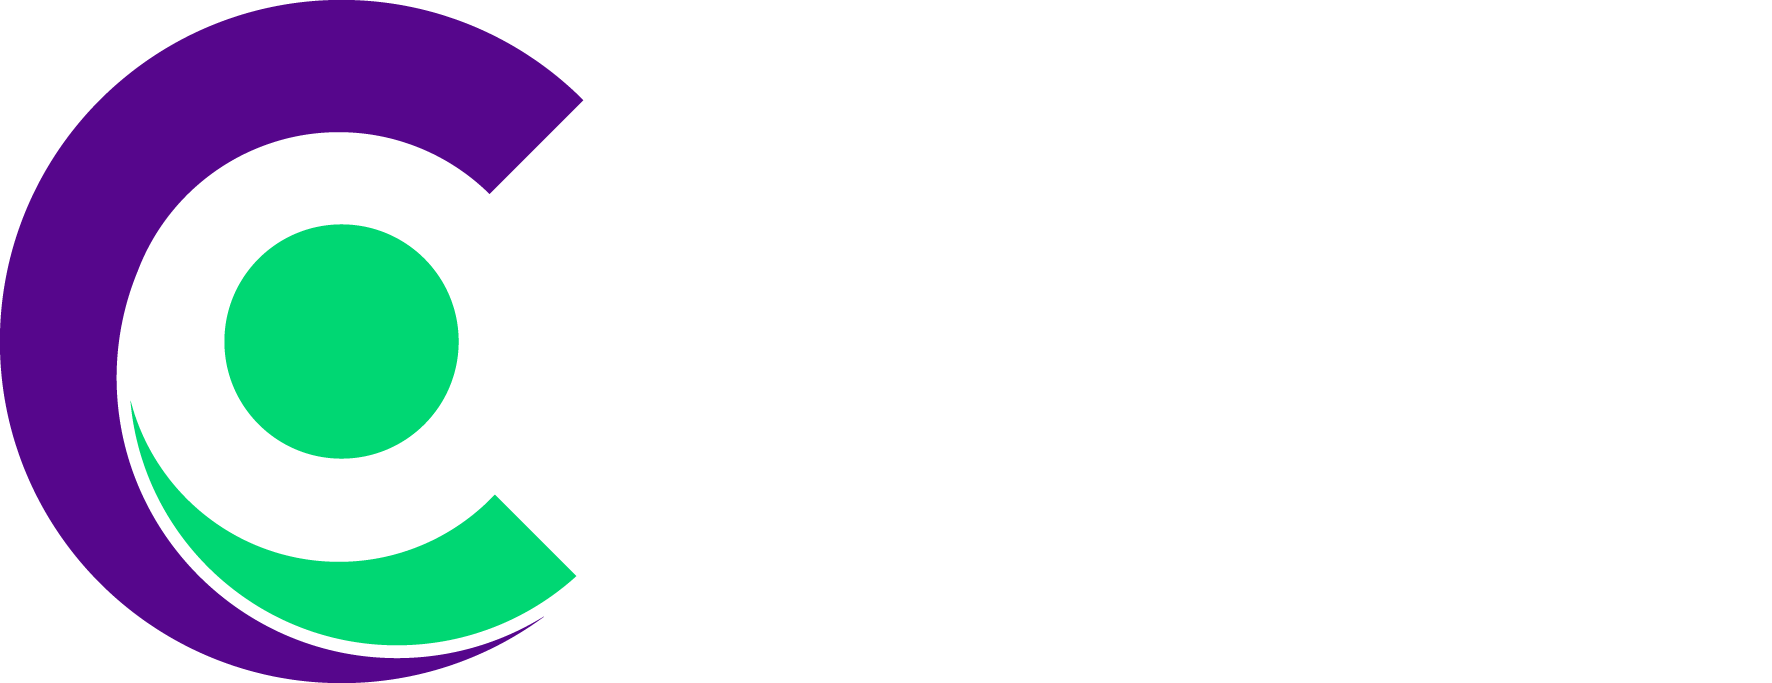 Canada Crowned Curling World Cup Mixed Doubles Champs - Curling World Cup Logo (1772x683), Png Download